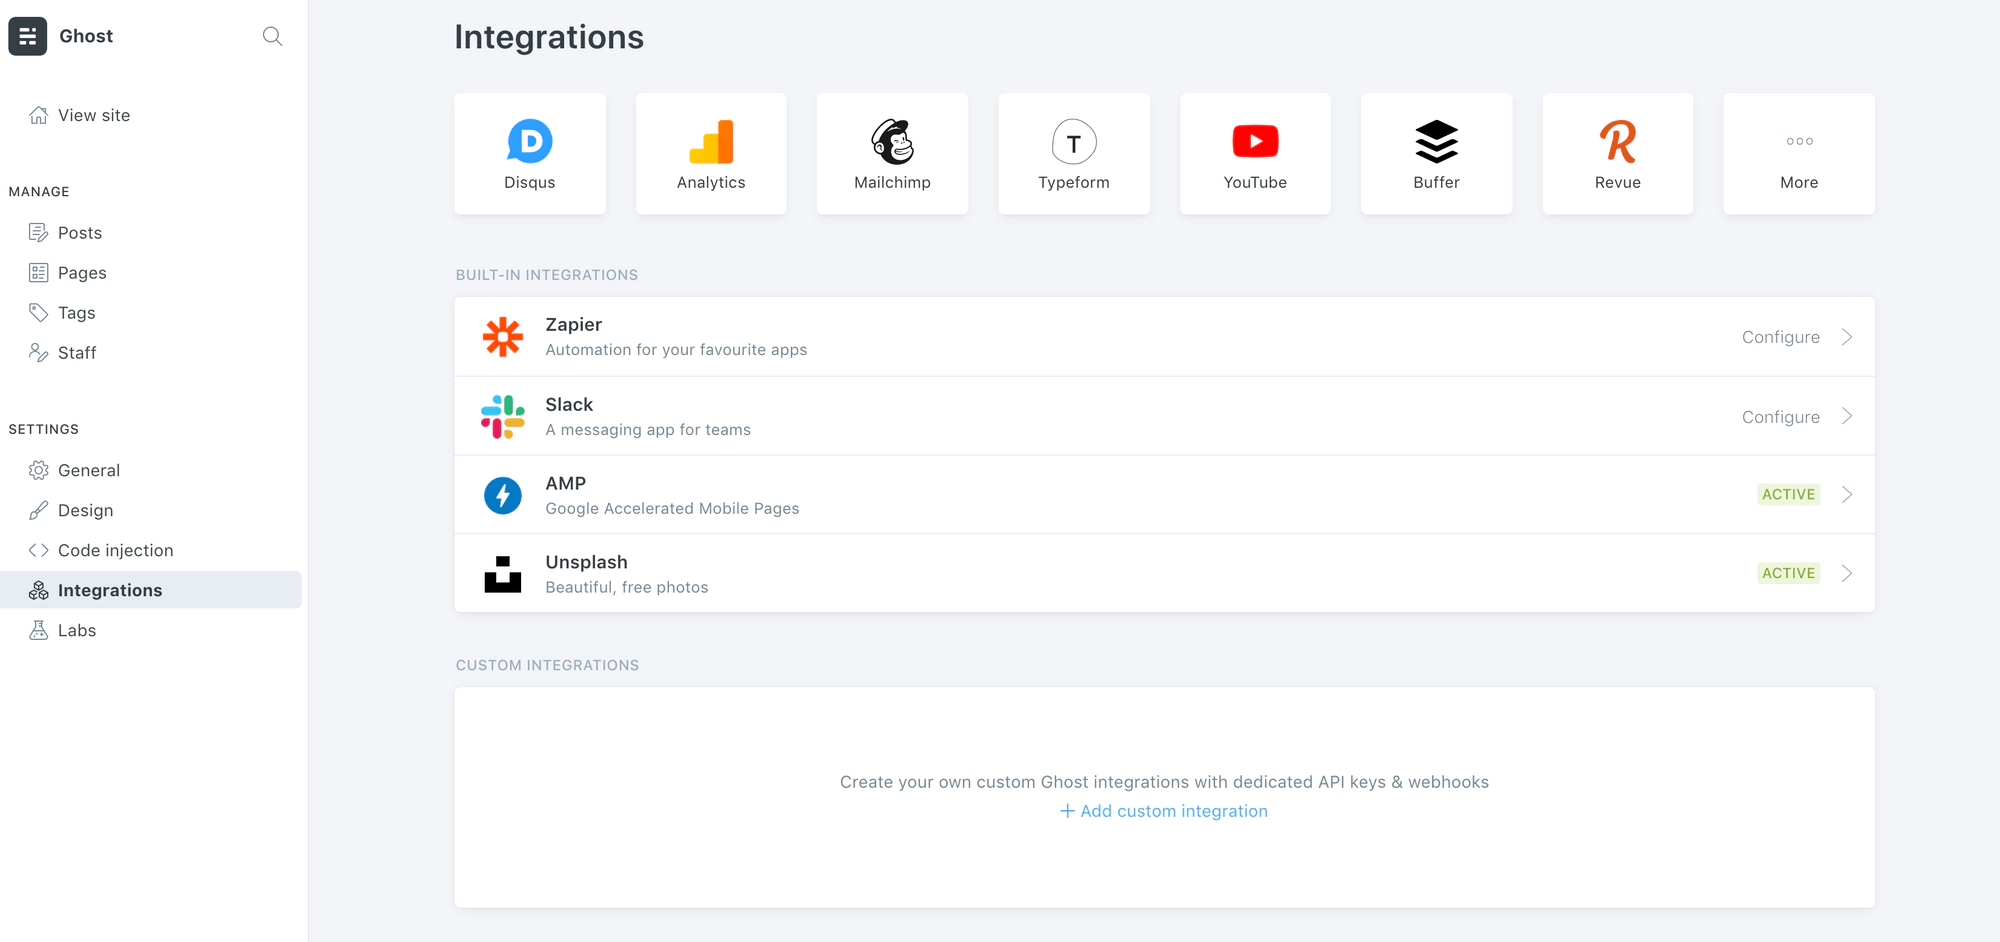 Integrations view in Ghost admin